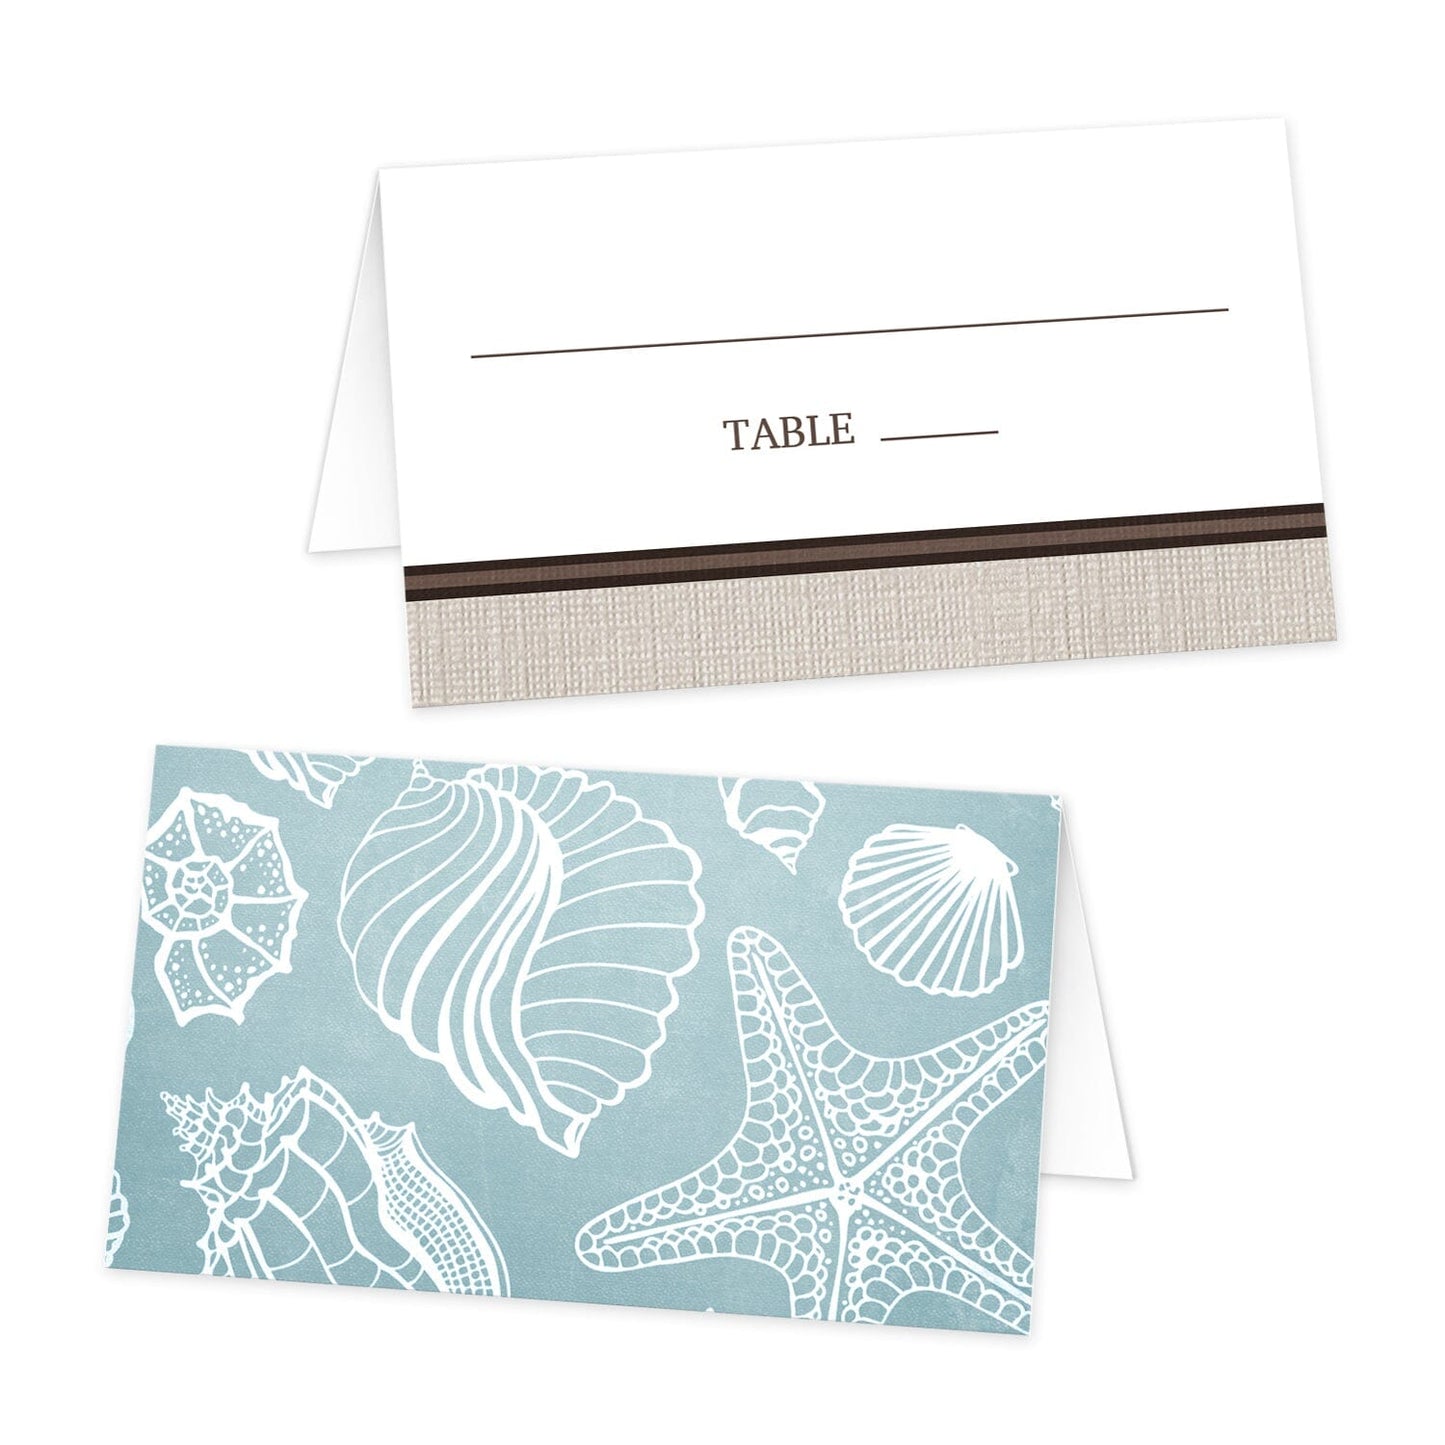 Rustic Beach Linen Folded Place Cards at Artistically Invited. Rustic beach linen folded place cards with a white line seashell pattern over a beachy turquoise background on one side of the cards. Your lines for writing the guest's name and table number are on the other side of the fold of these cards in a white space above a brown stripe with a beige canvas design that runs along the bottom.